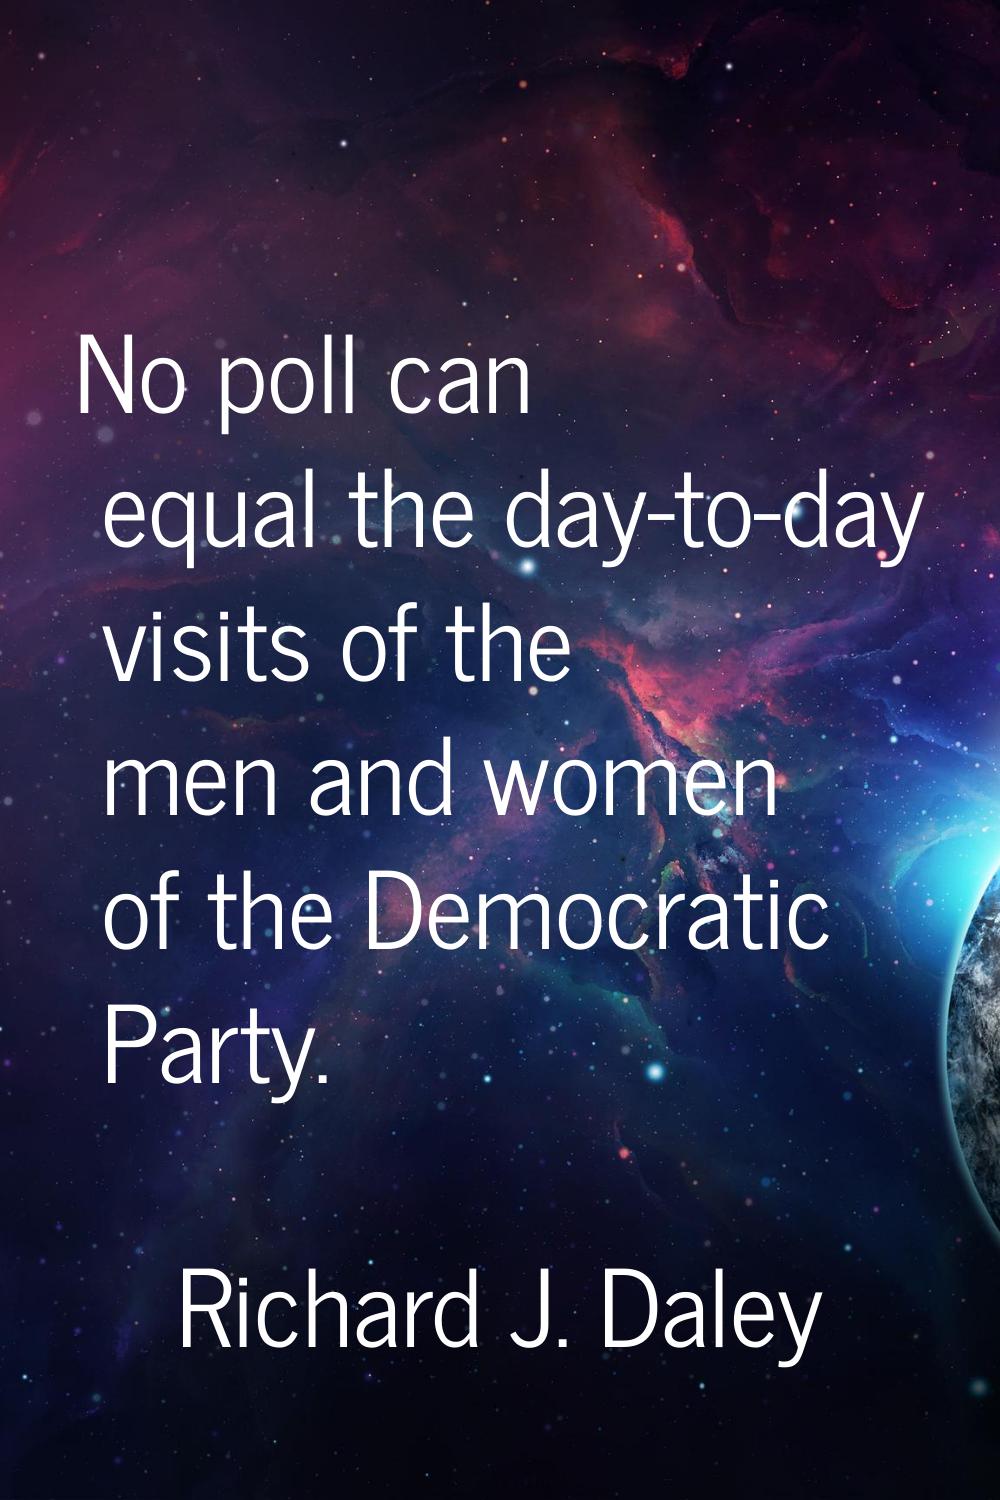 No poll can equal the day-to-day visits of the men and women of the Democratic Party.